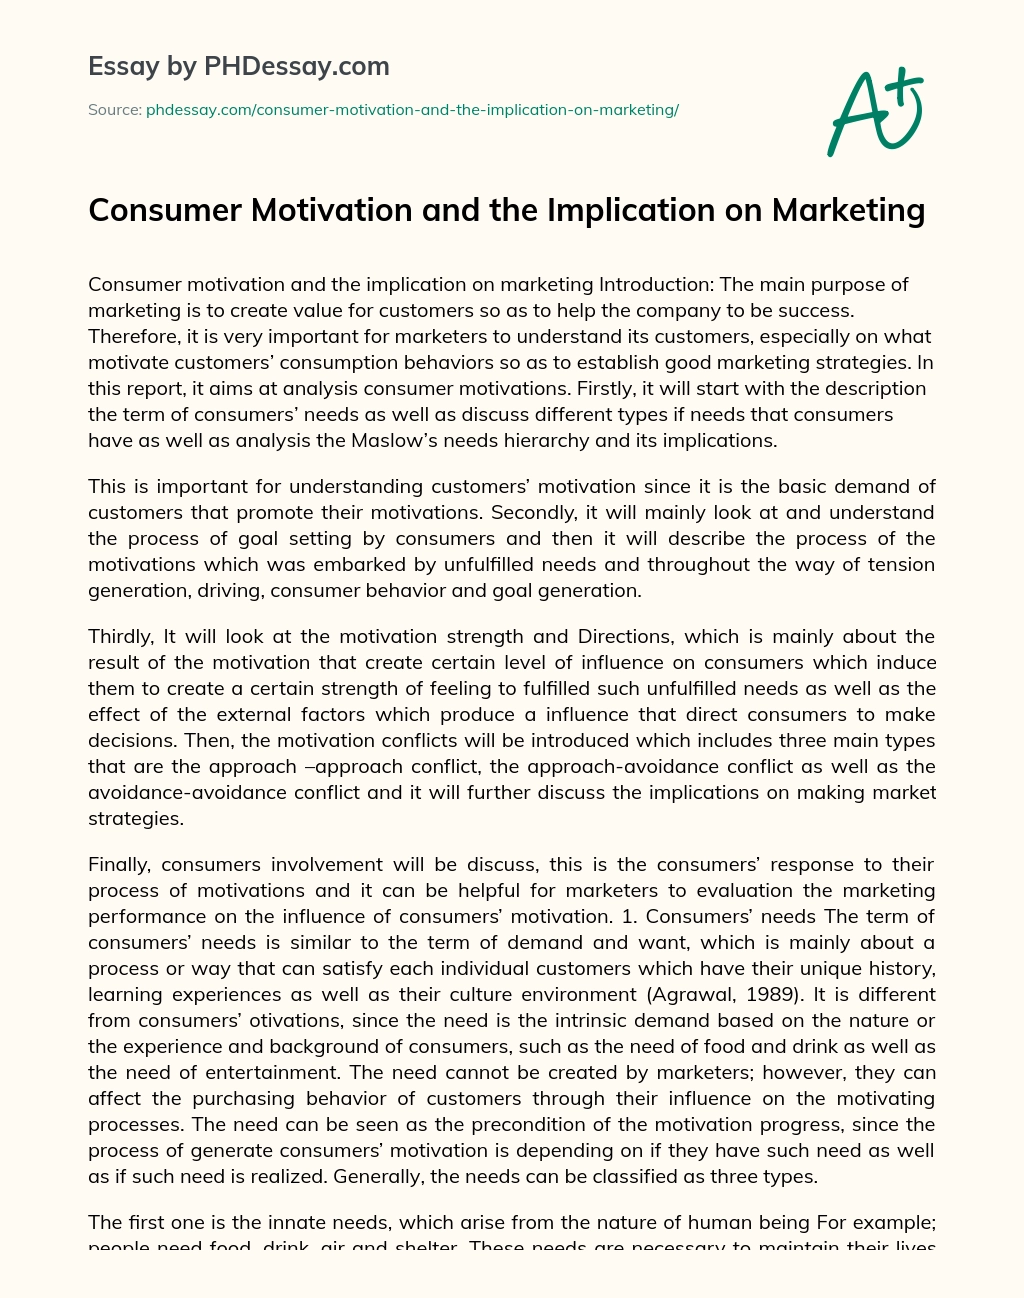 Consumer Motivation and the Implication on Marketing essay